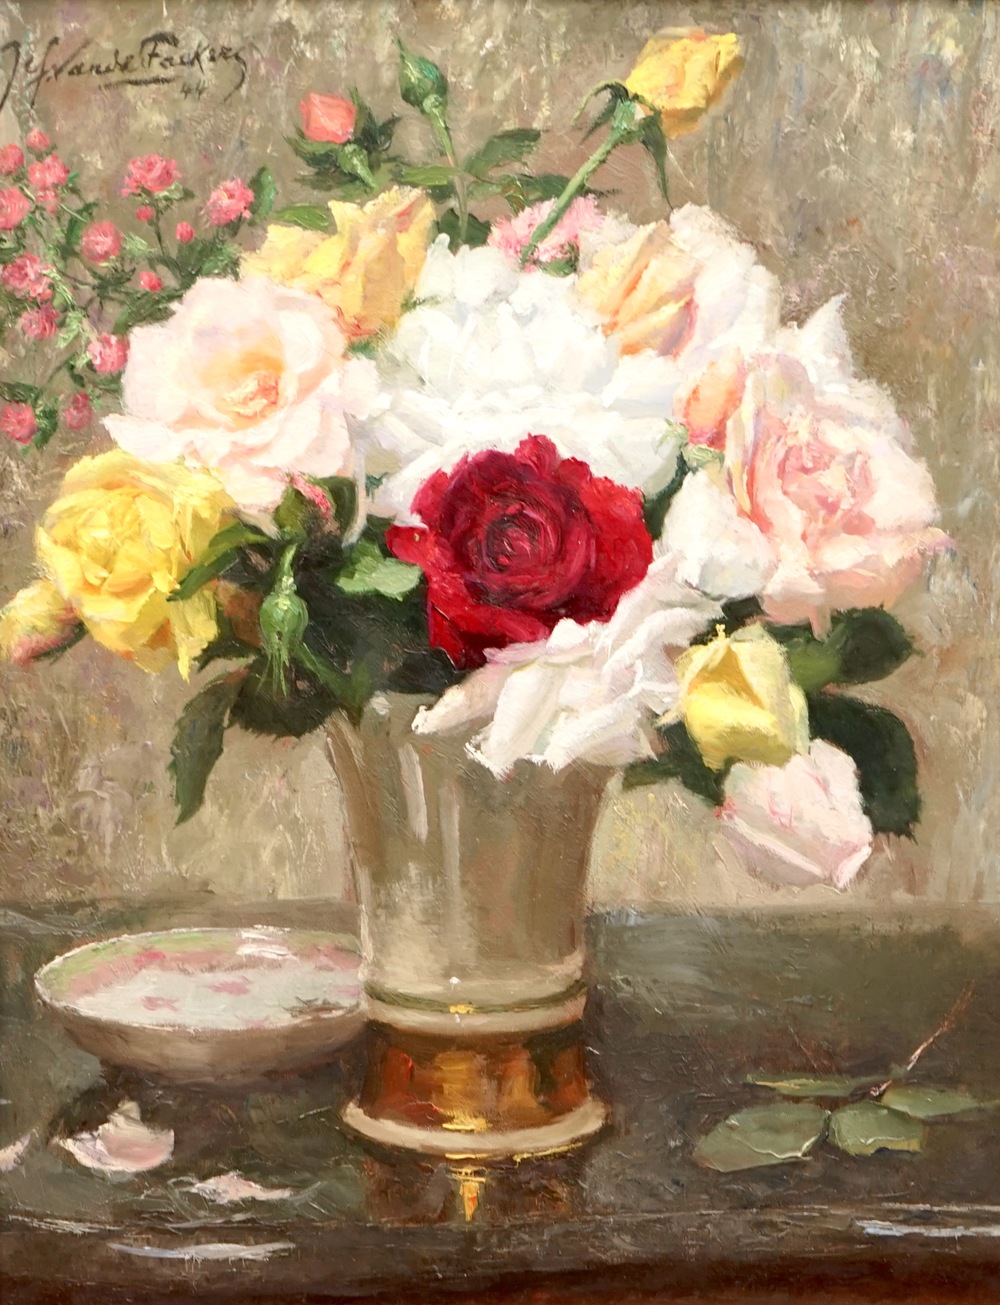 Jef Vandefackere (1879-1946), a still life with roses, dated 1944, oil on canvas